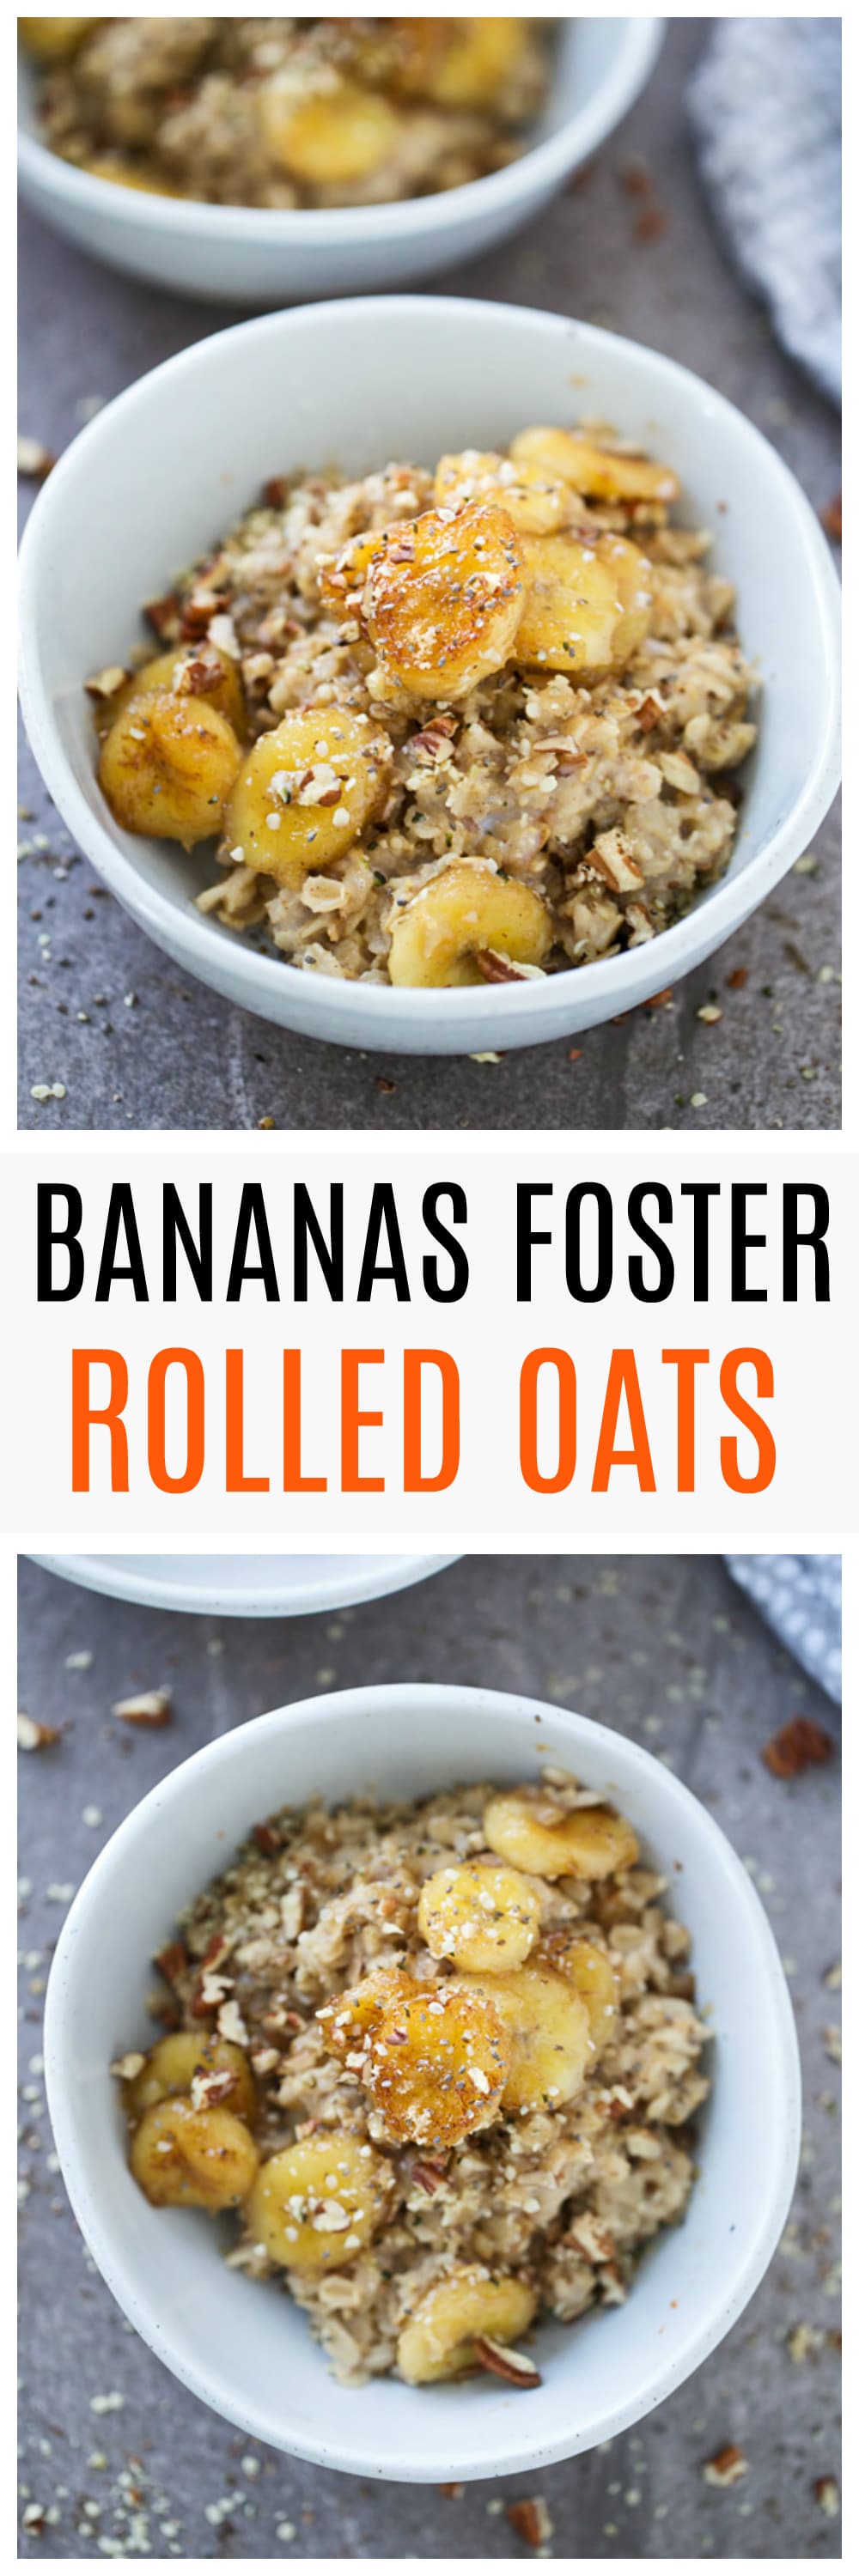 Bananas Foster Rolled Oats